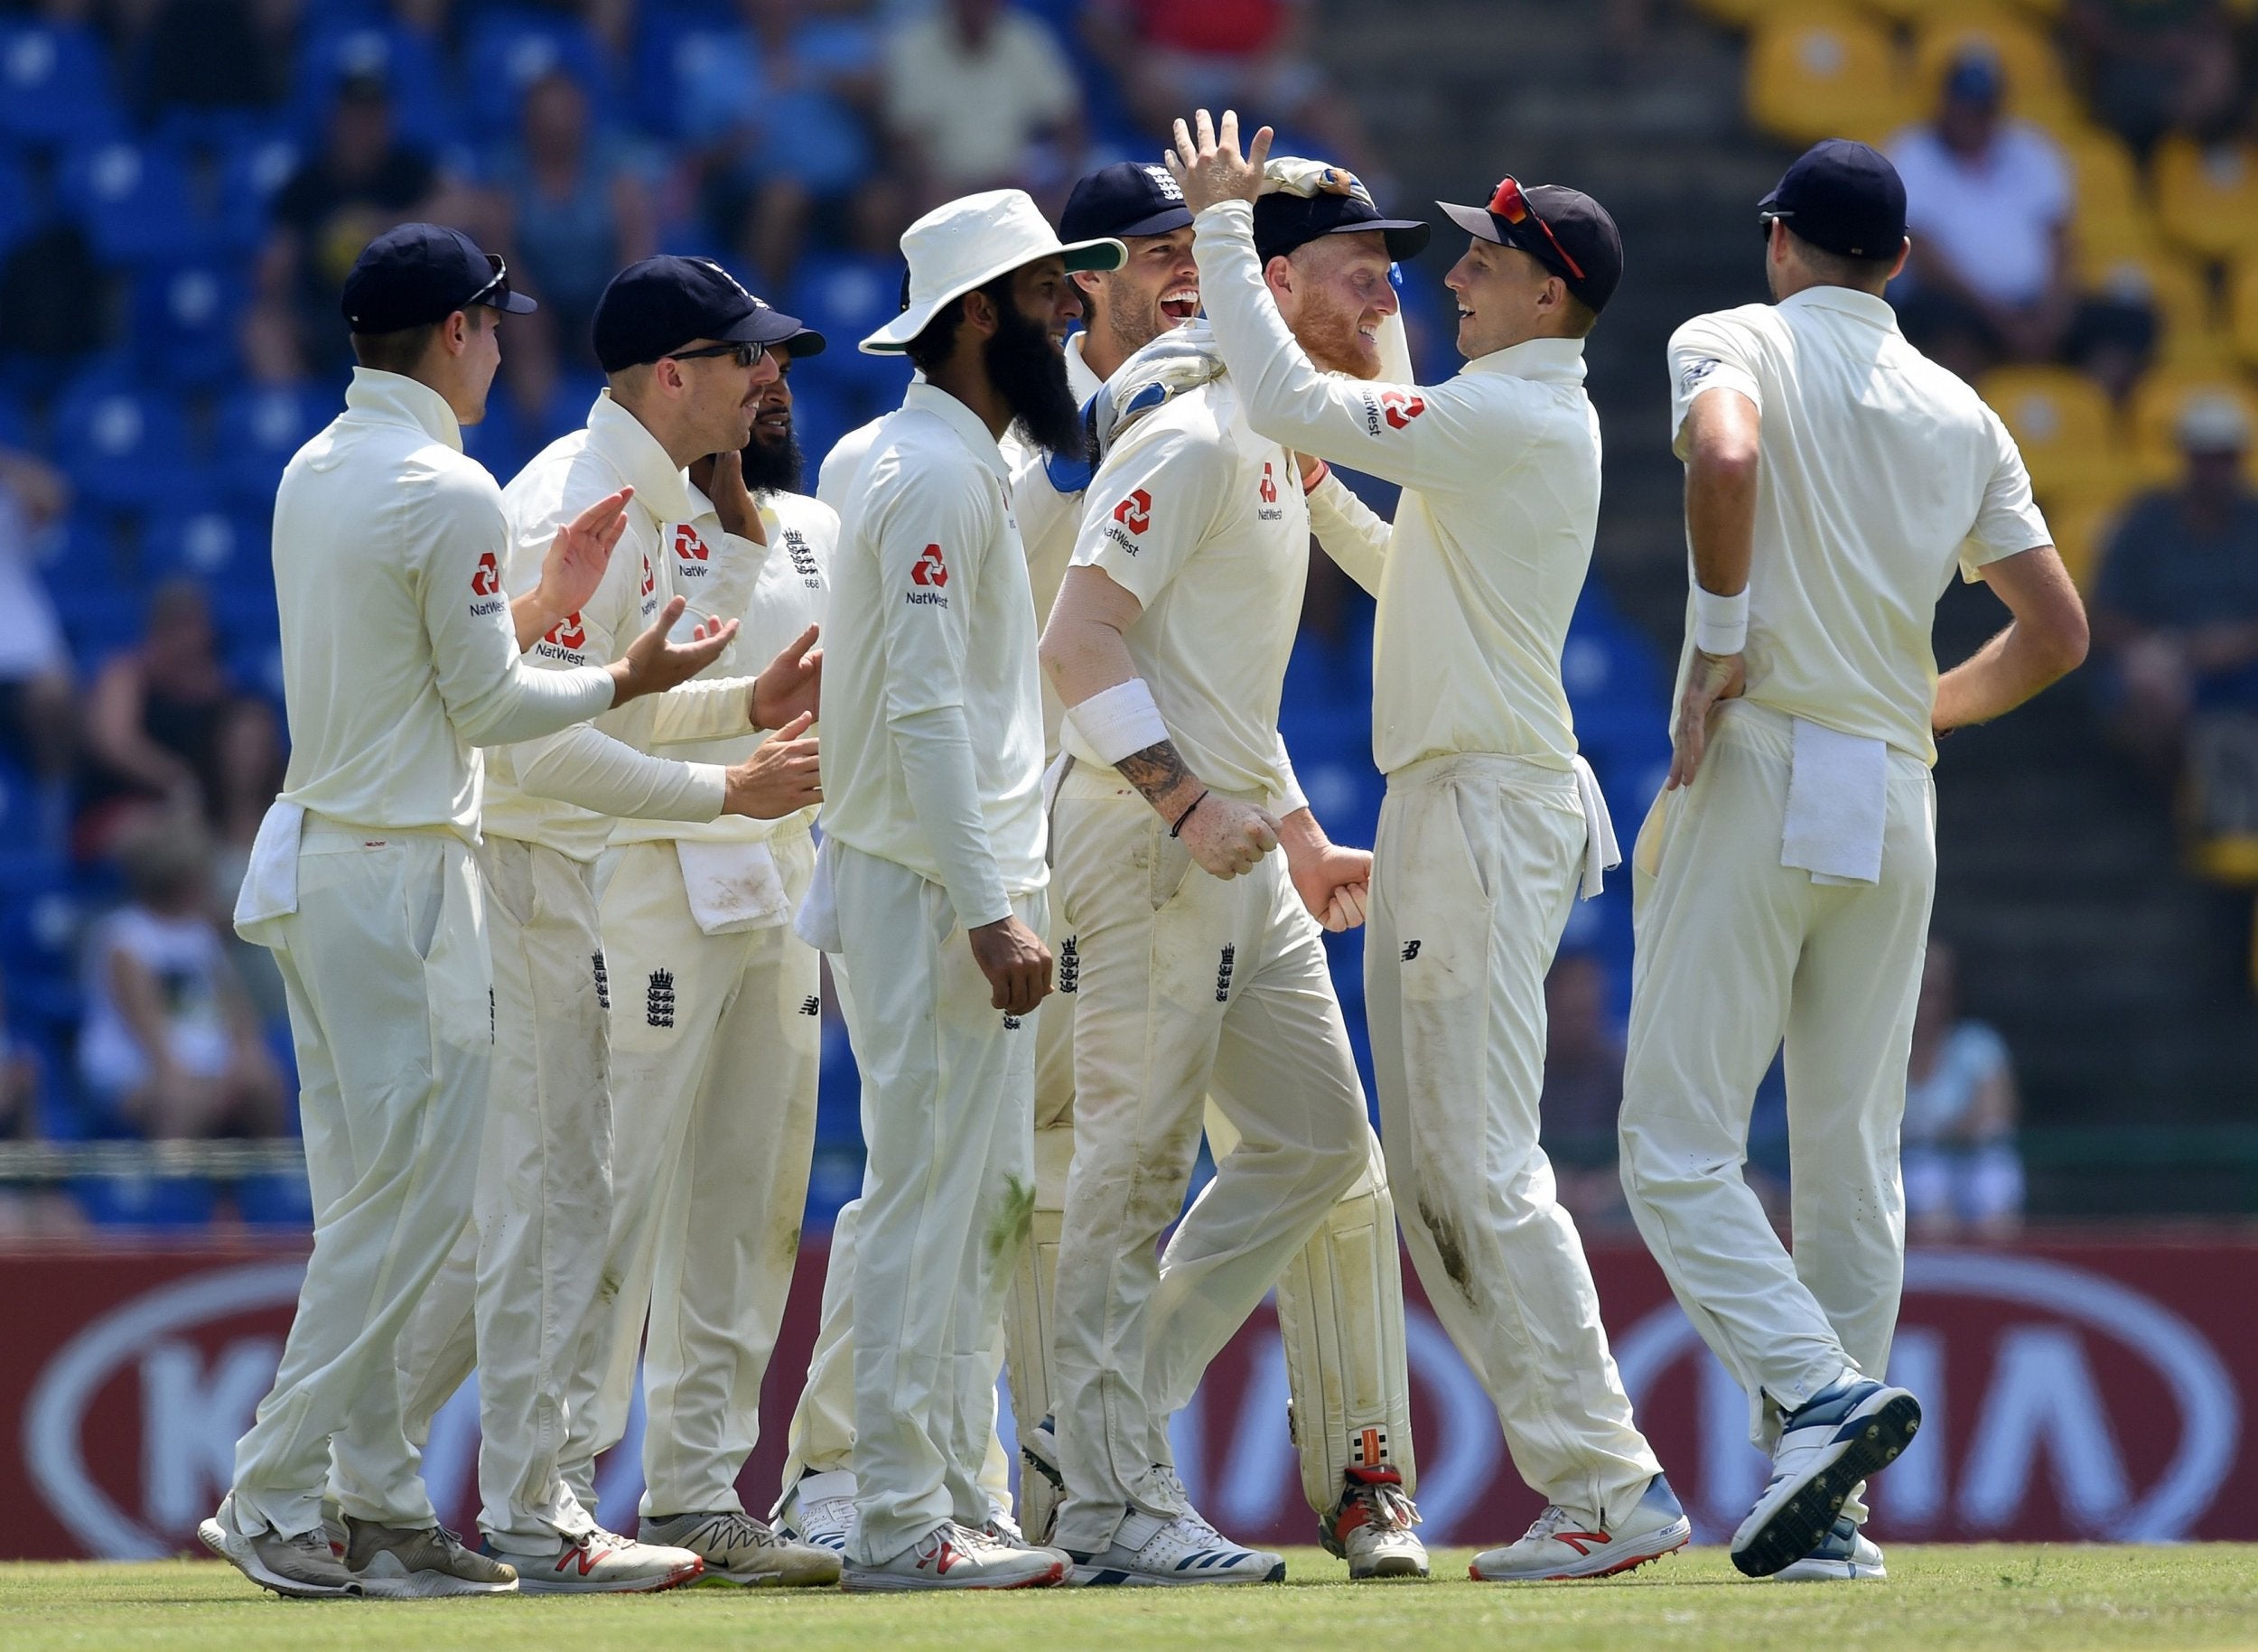 Ben Stokes celebrates after taking the valuable wicket of Dimuth Karunaratne